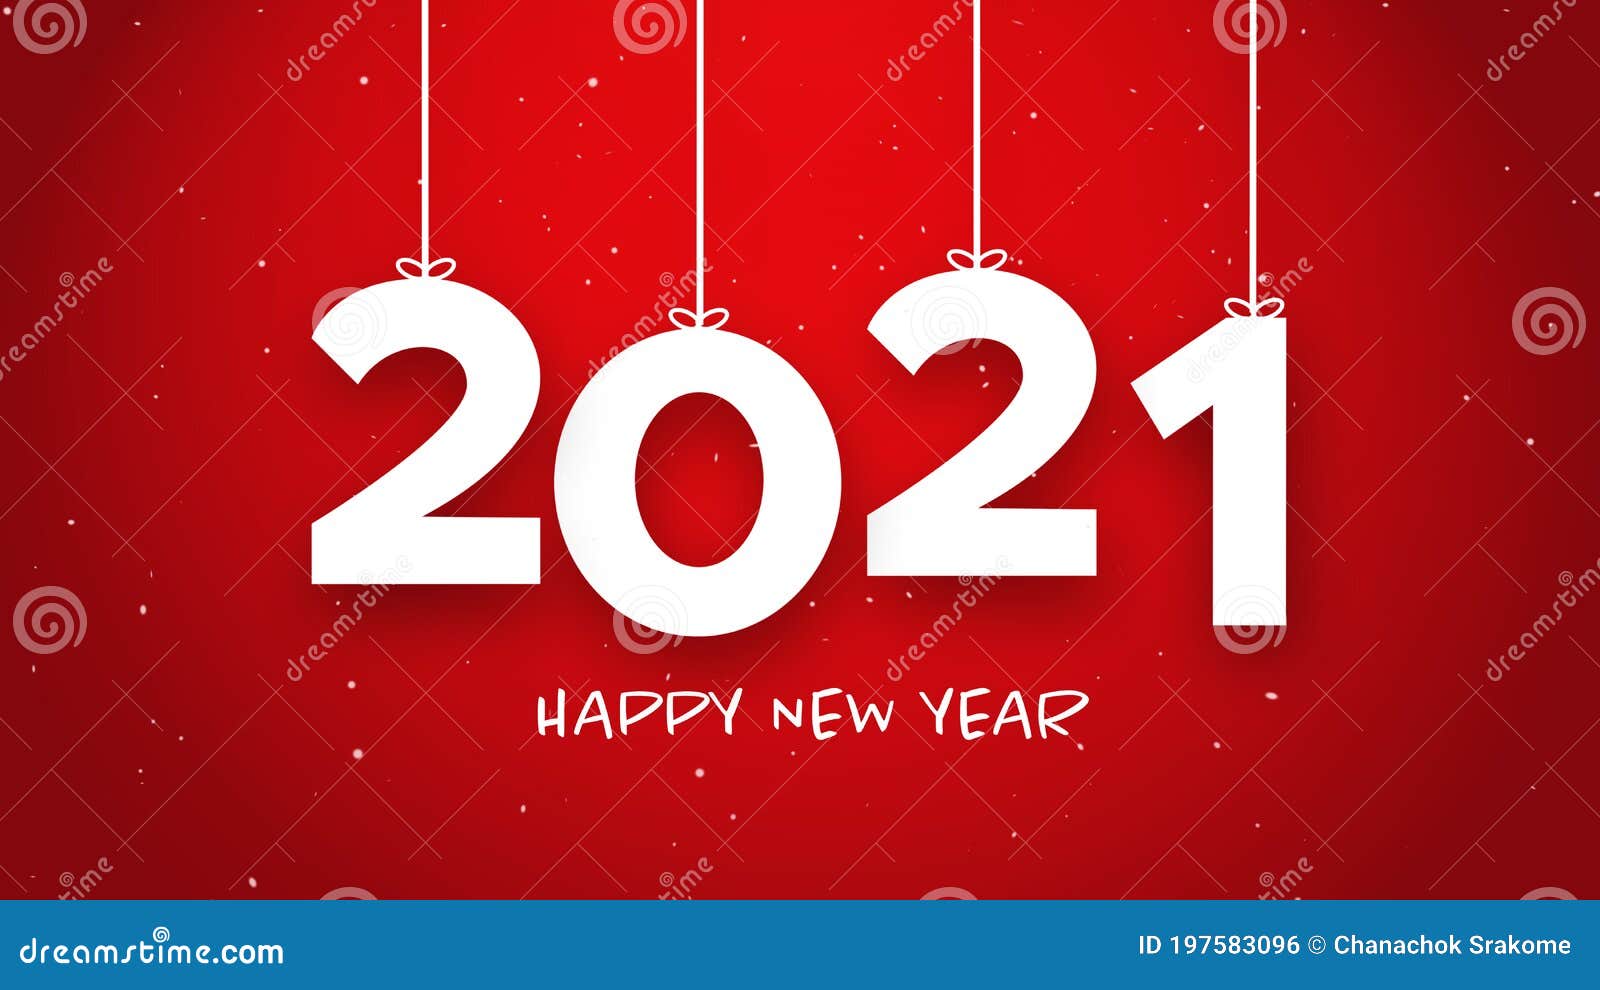 Happy New Year 2021 String Red Background Stock Photo - Image of design,  graphic: 197583096